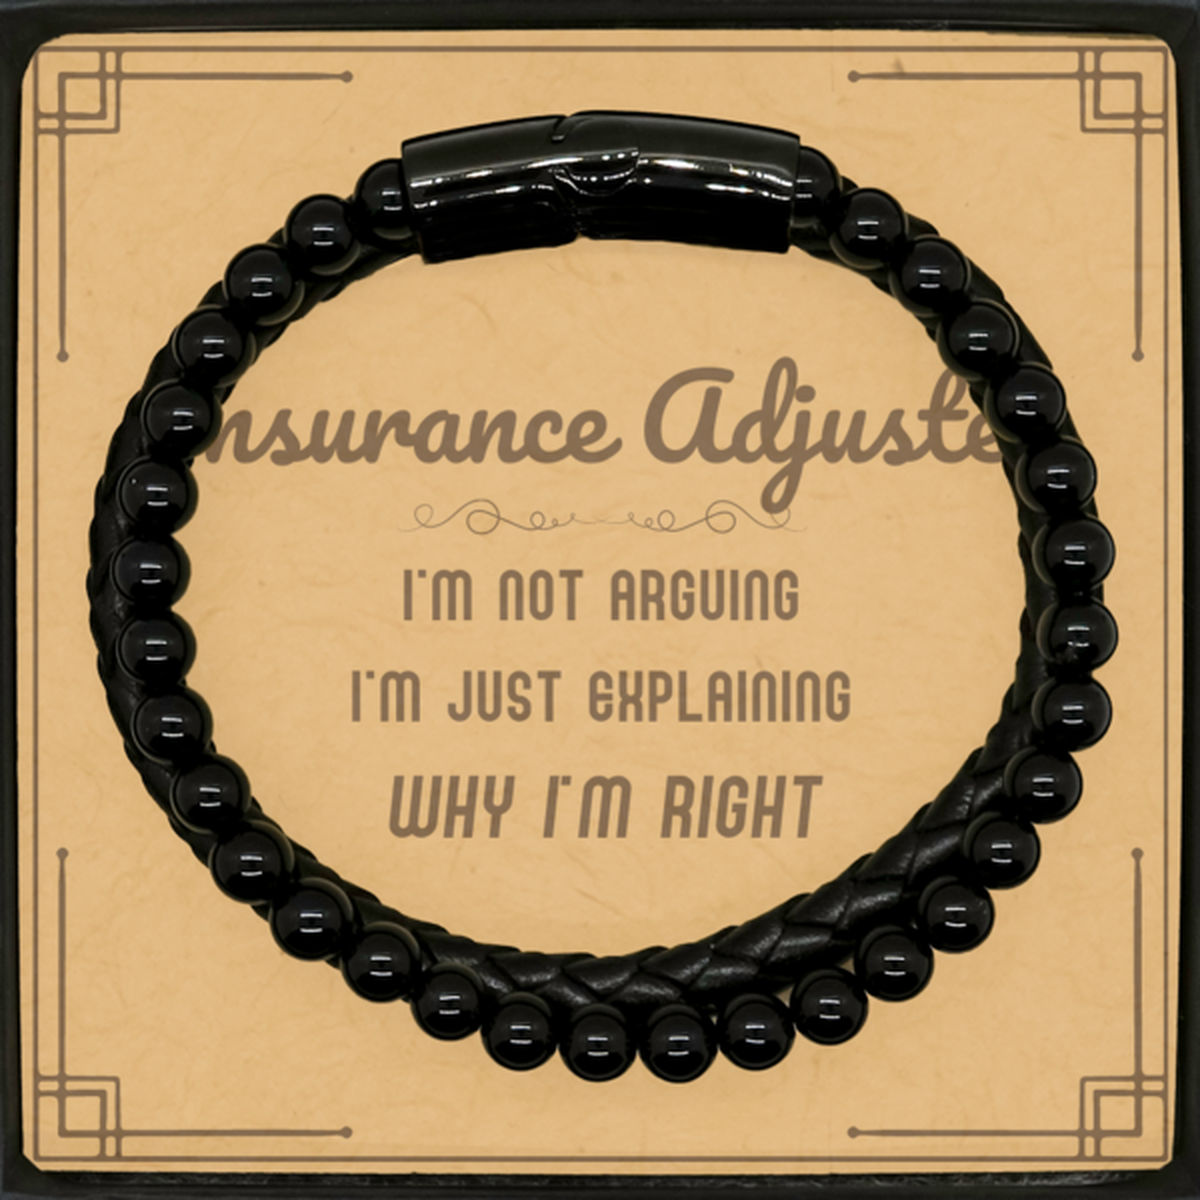 Insurance Adjuster I'm not Arguing. I'm Just Explaining Why I'm RIGHT Stone Leather Bracelets, Funny Saying Quote Insurance Adjuster Gifts For Insurance Adjuster Message Card Graduation Birthday Christmas Gifts for Men Women Coworker